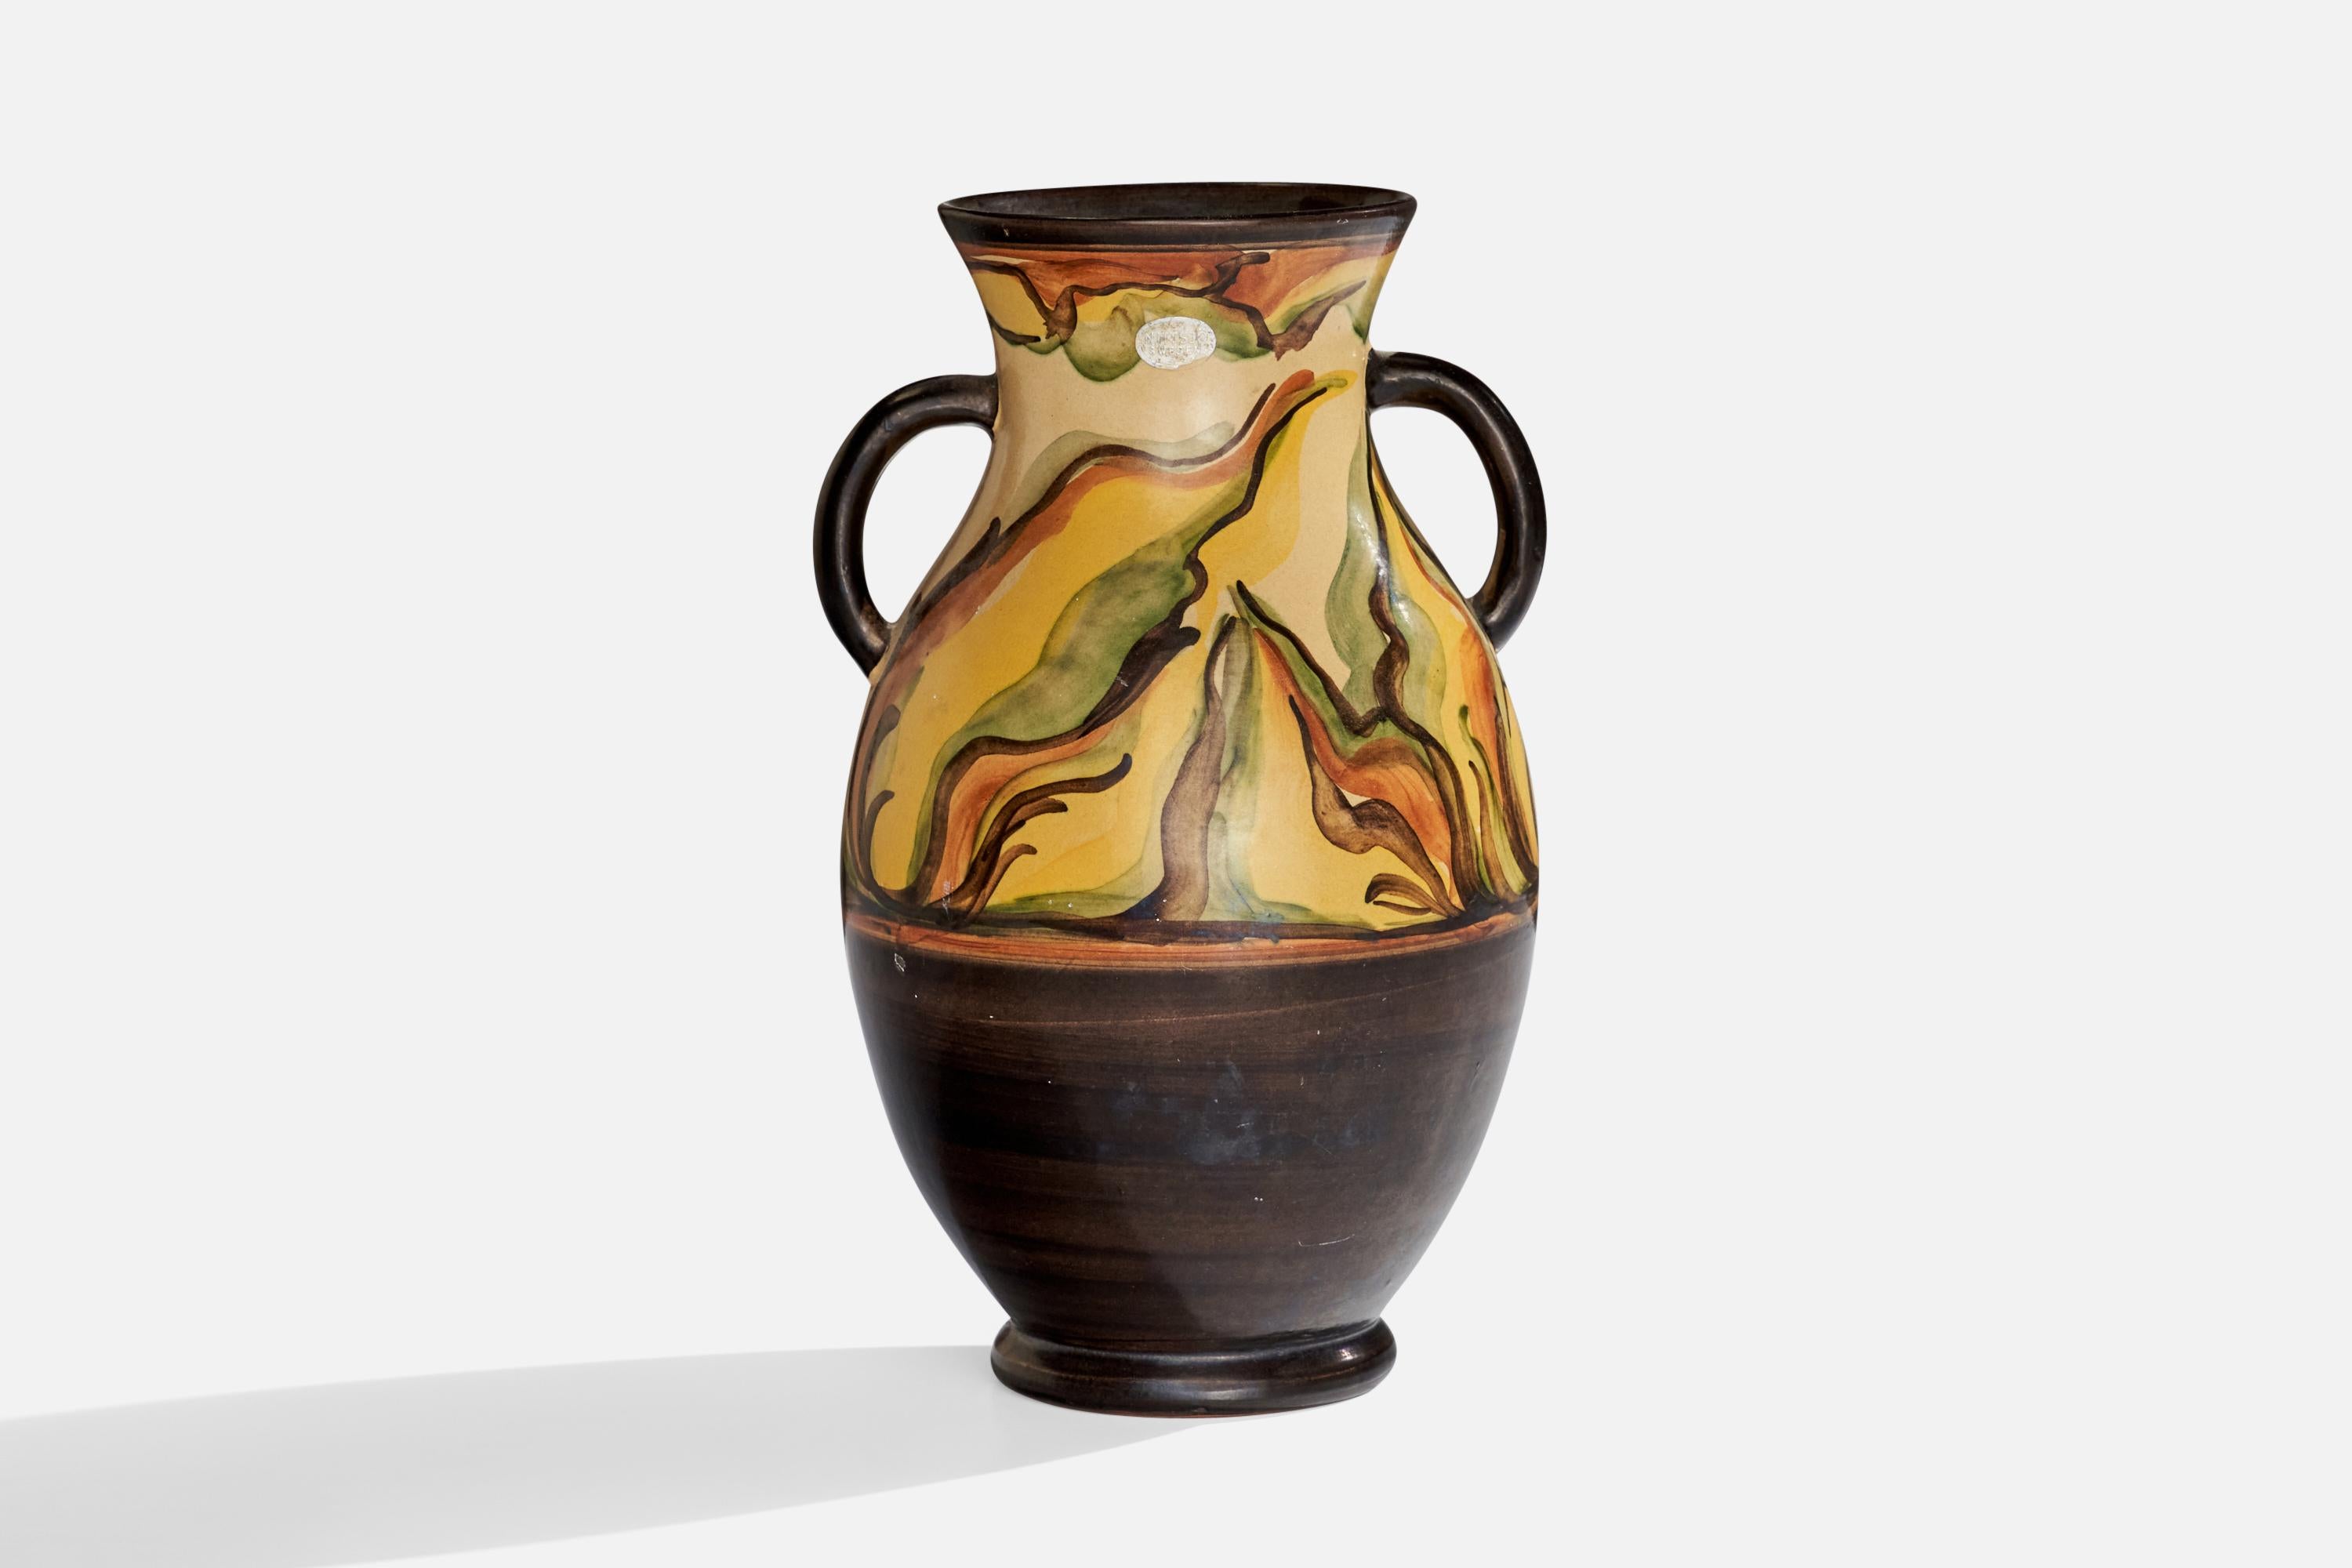 A hand-painted ceramic vase designed and produced by Nittsjö, Sweden, c. 1930s